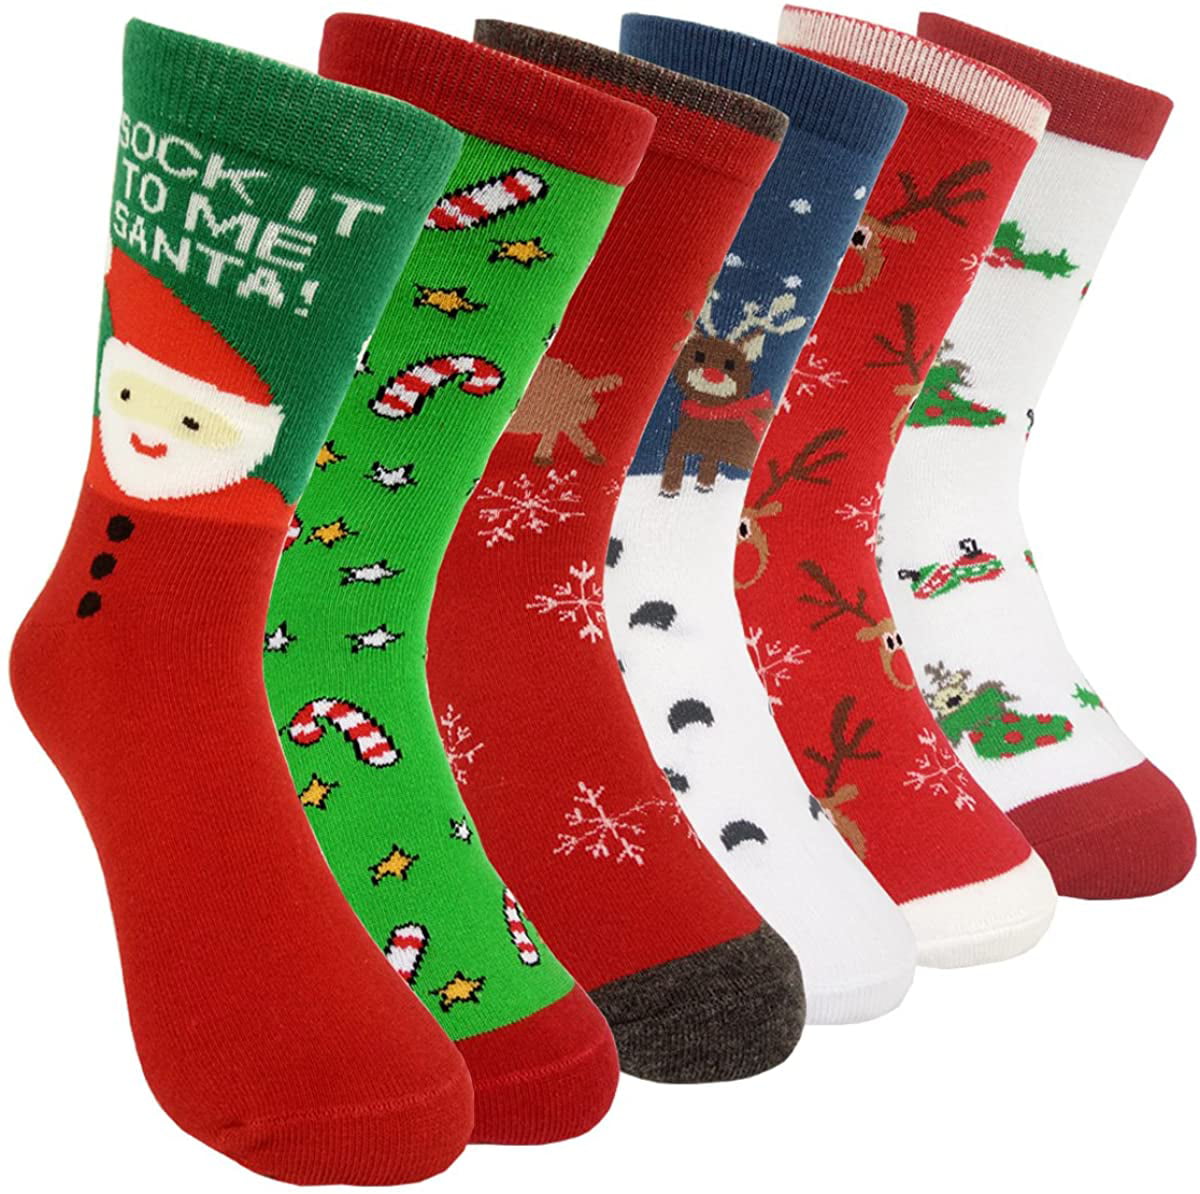 Womens Christmas Holiday Casual Socks HSELL 6 Pairs Colorful Fun Cotton Crew Socks for Novelty Gifts